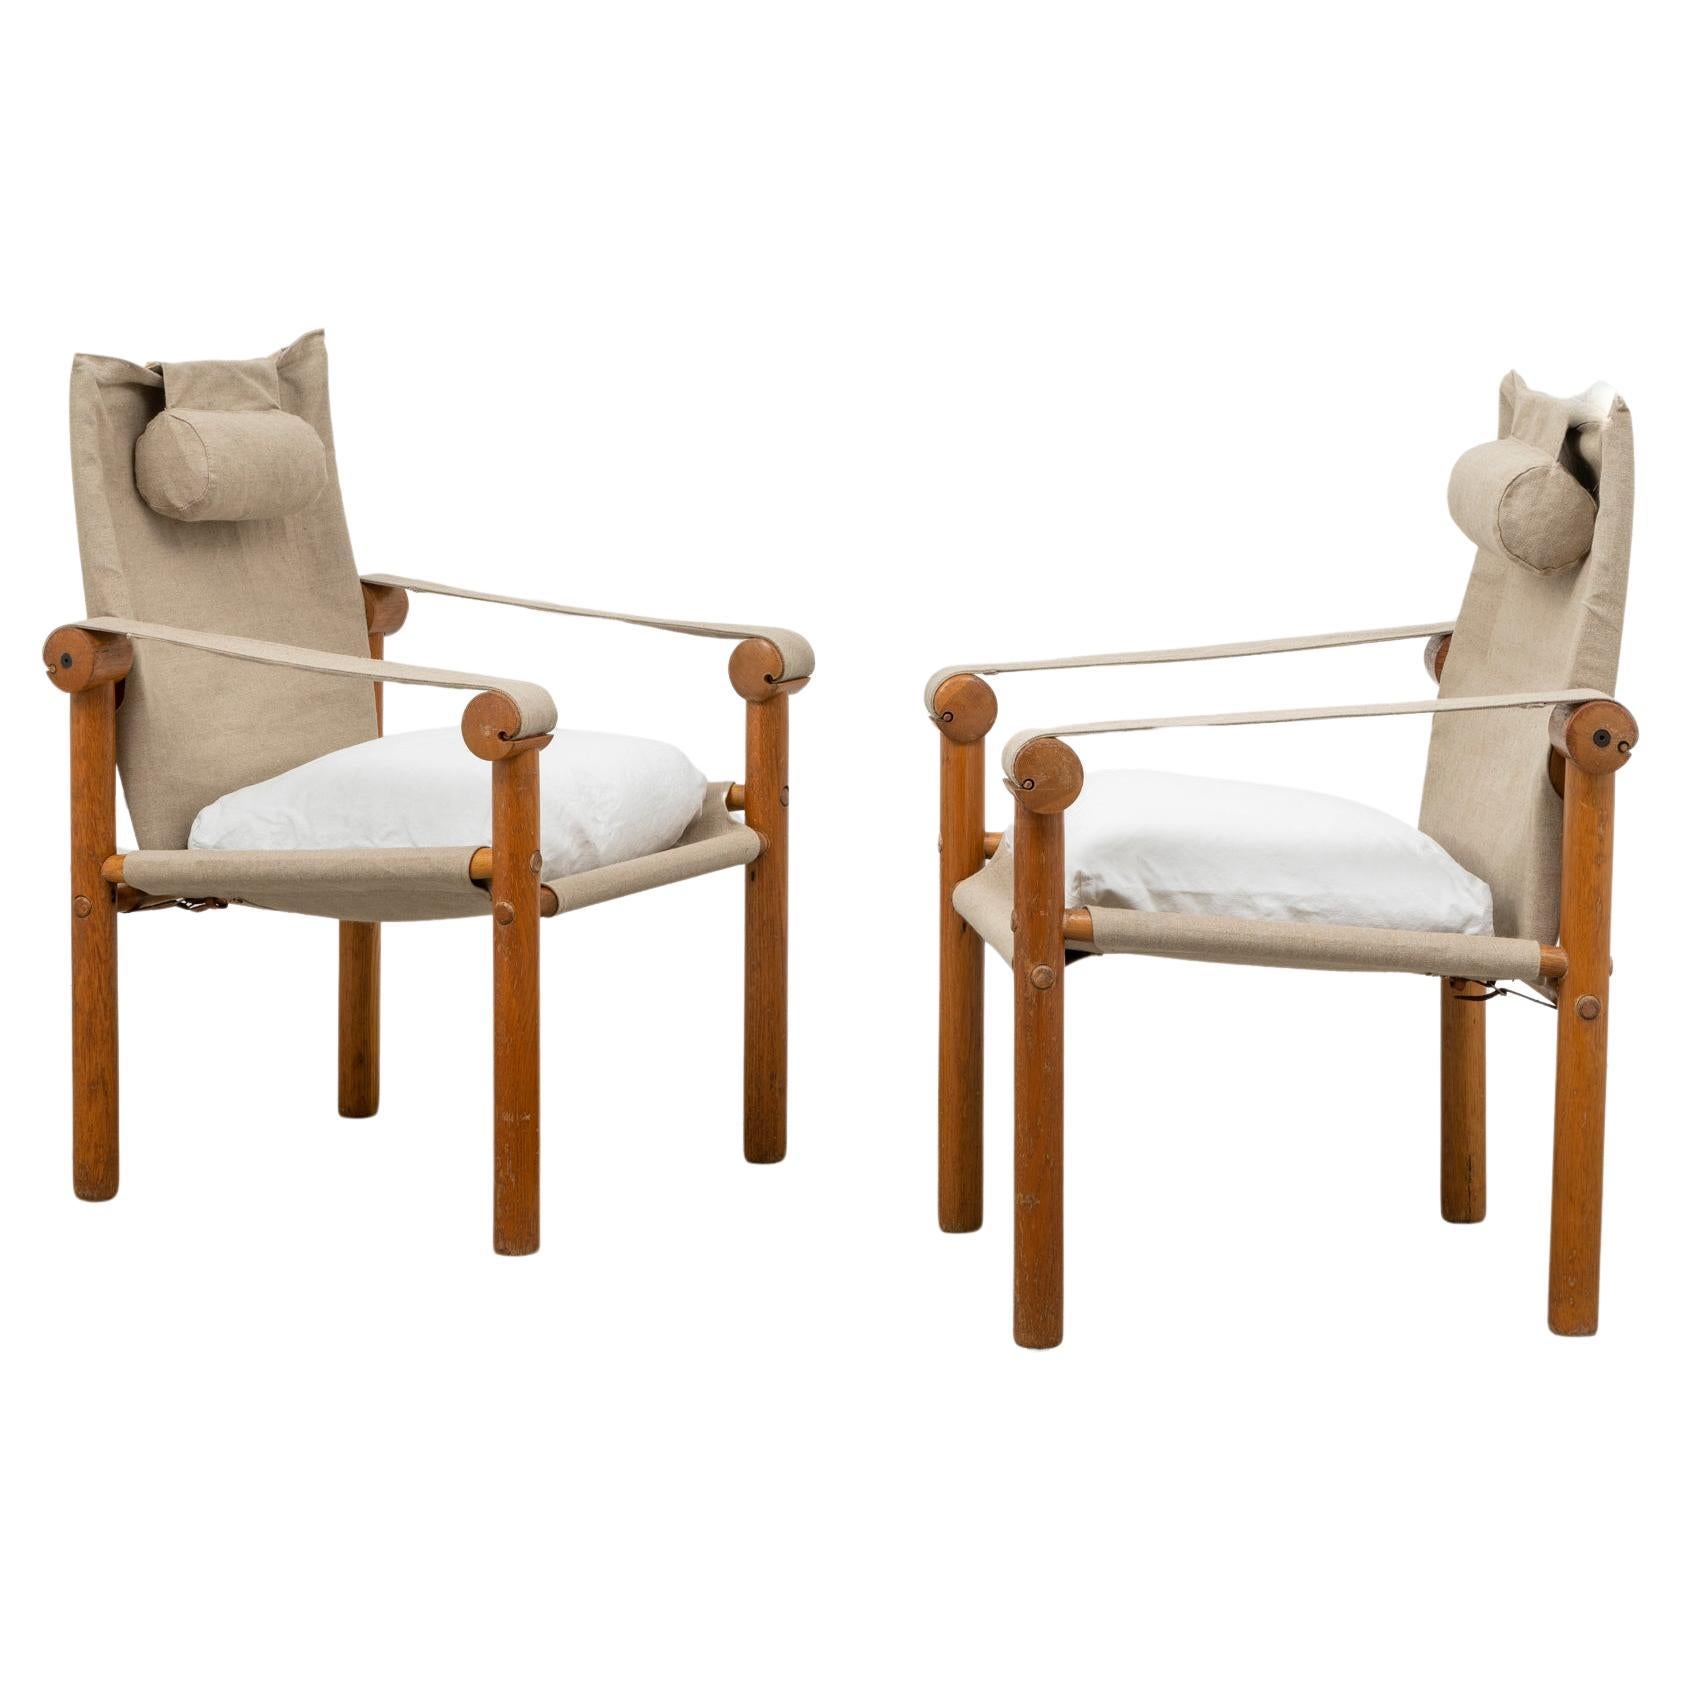 Pair of Safari Demountable Armchairs by Roberto Menghi for Zanotta, 1970s For Sale